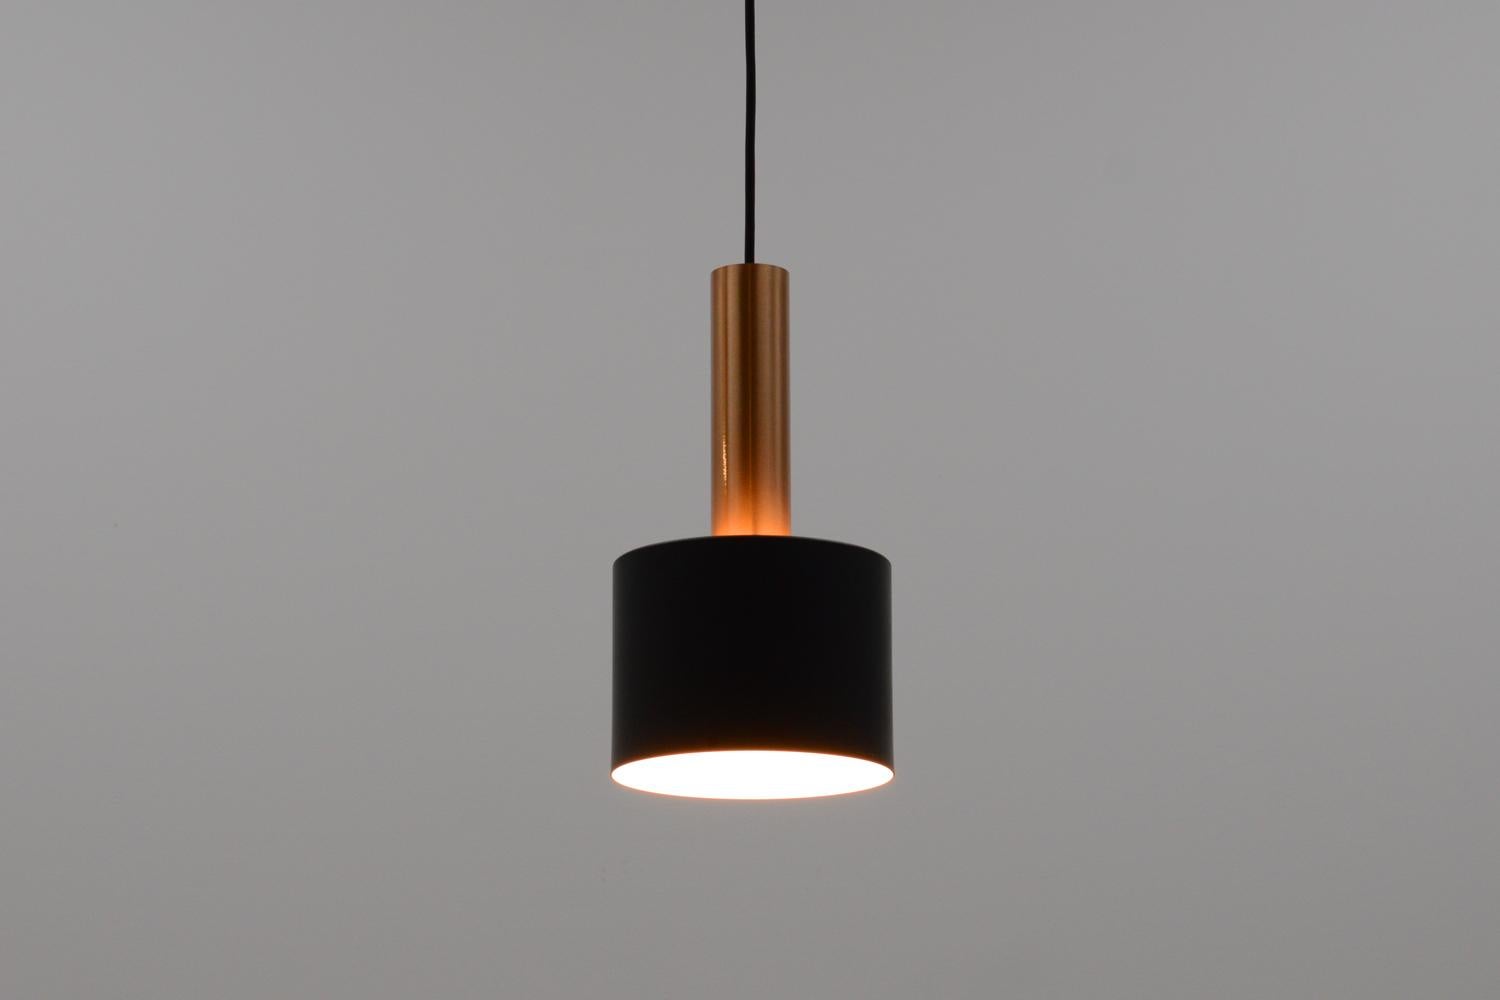 Pendant lamp by Doria leuchten, Germany 60s. Made of copper and black colored aluminum. Hold a E27 bulb. In very good vintage condition. 2 in stock!.

 